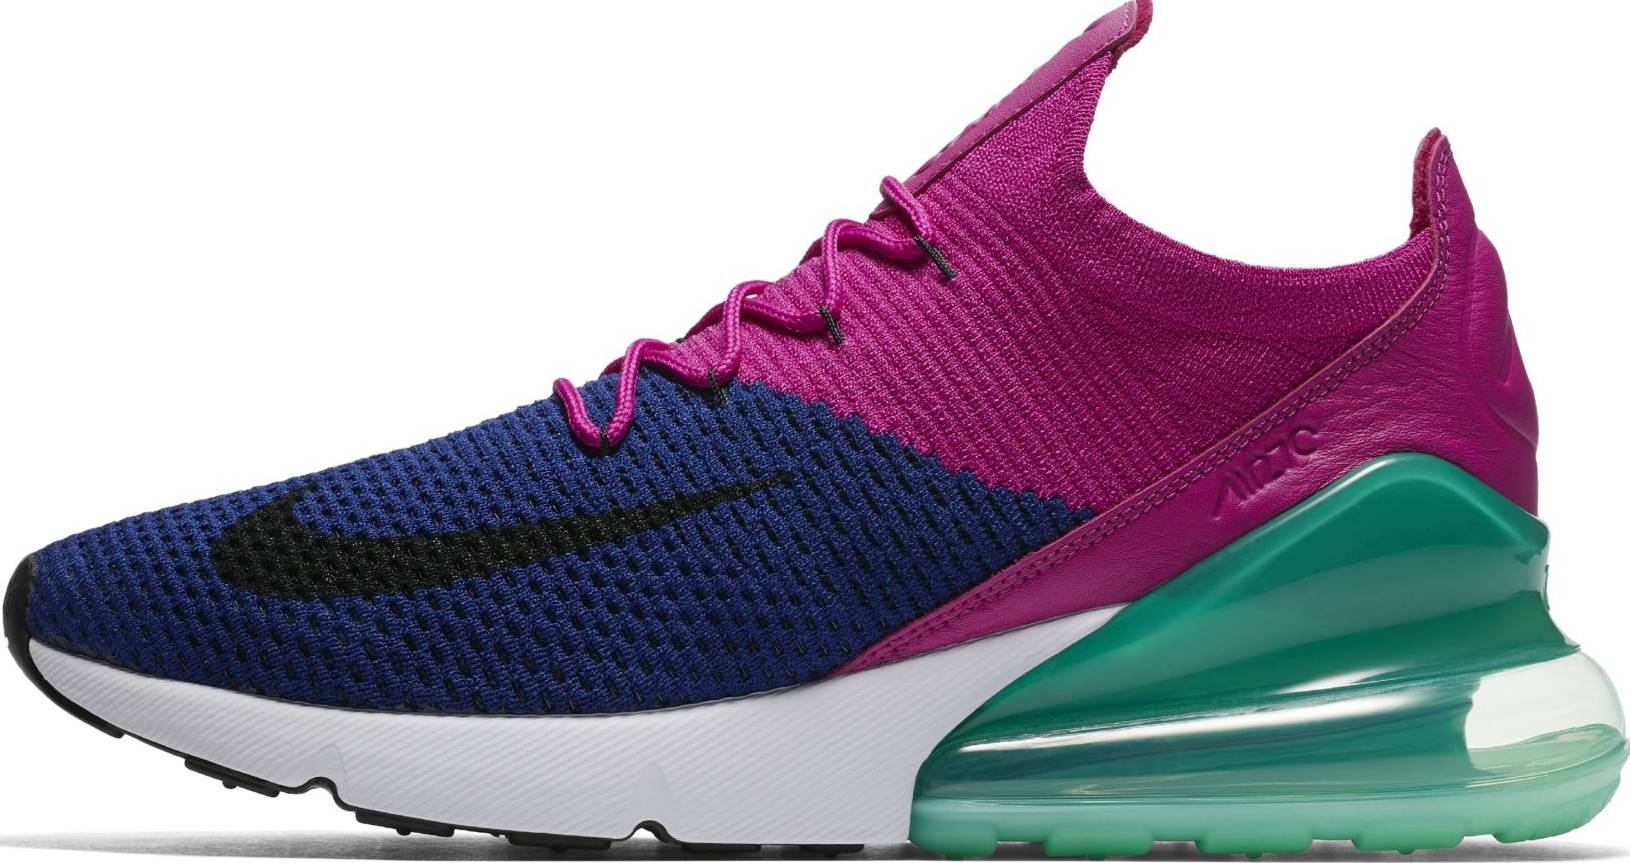 nike air max 270 flyknit trainer